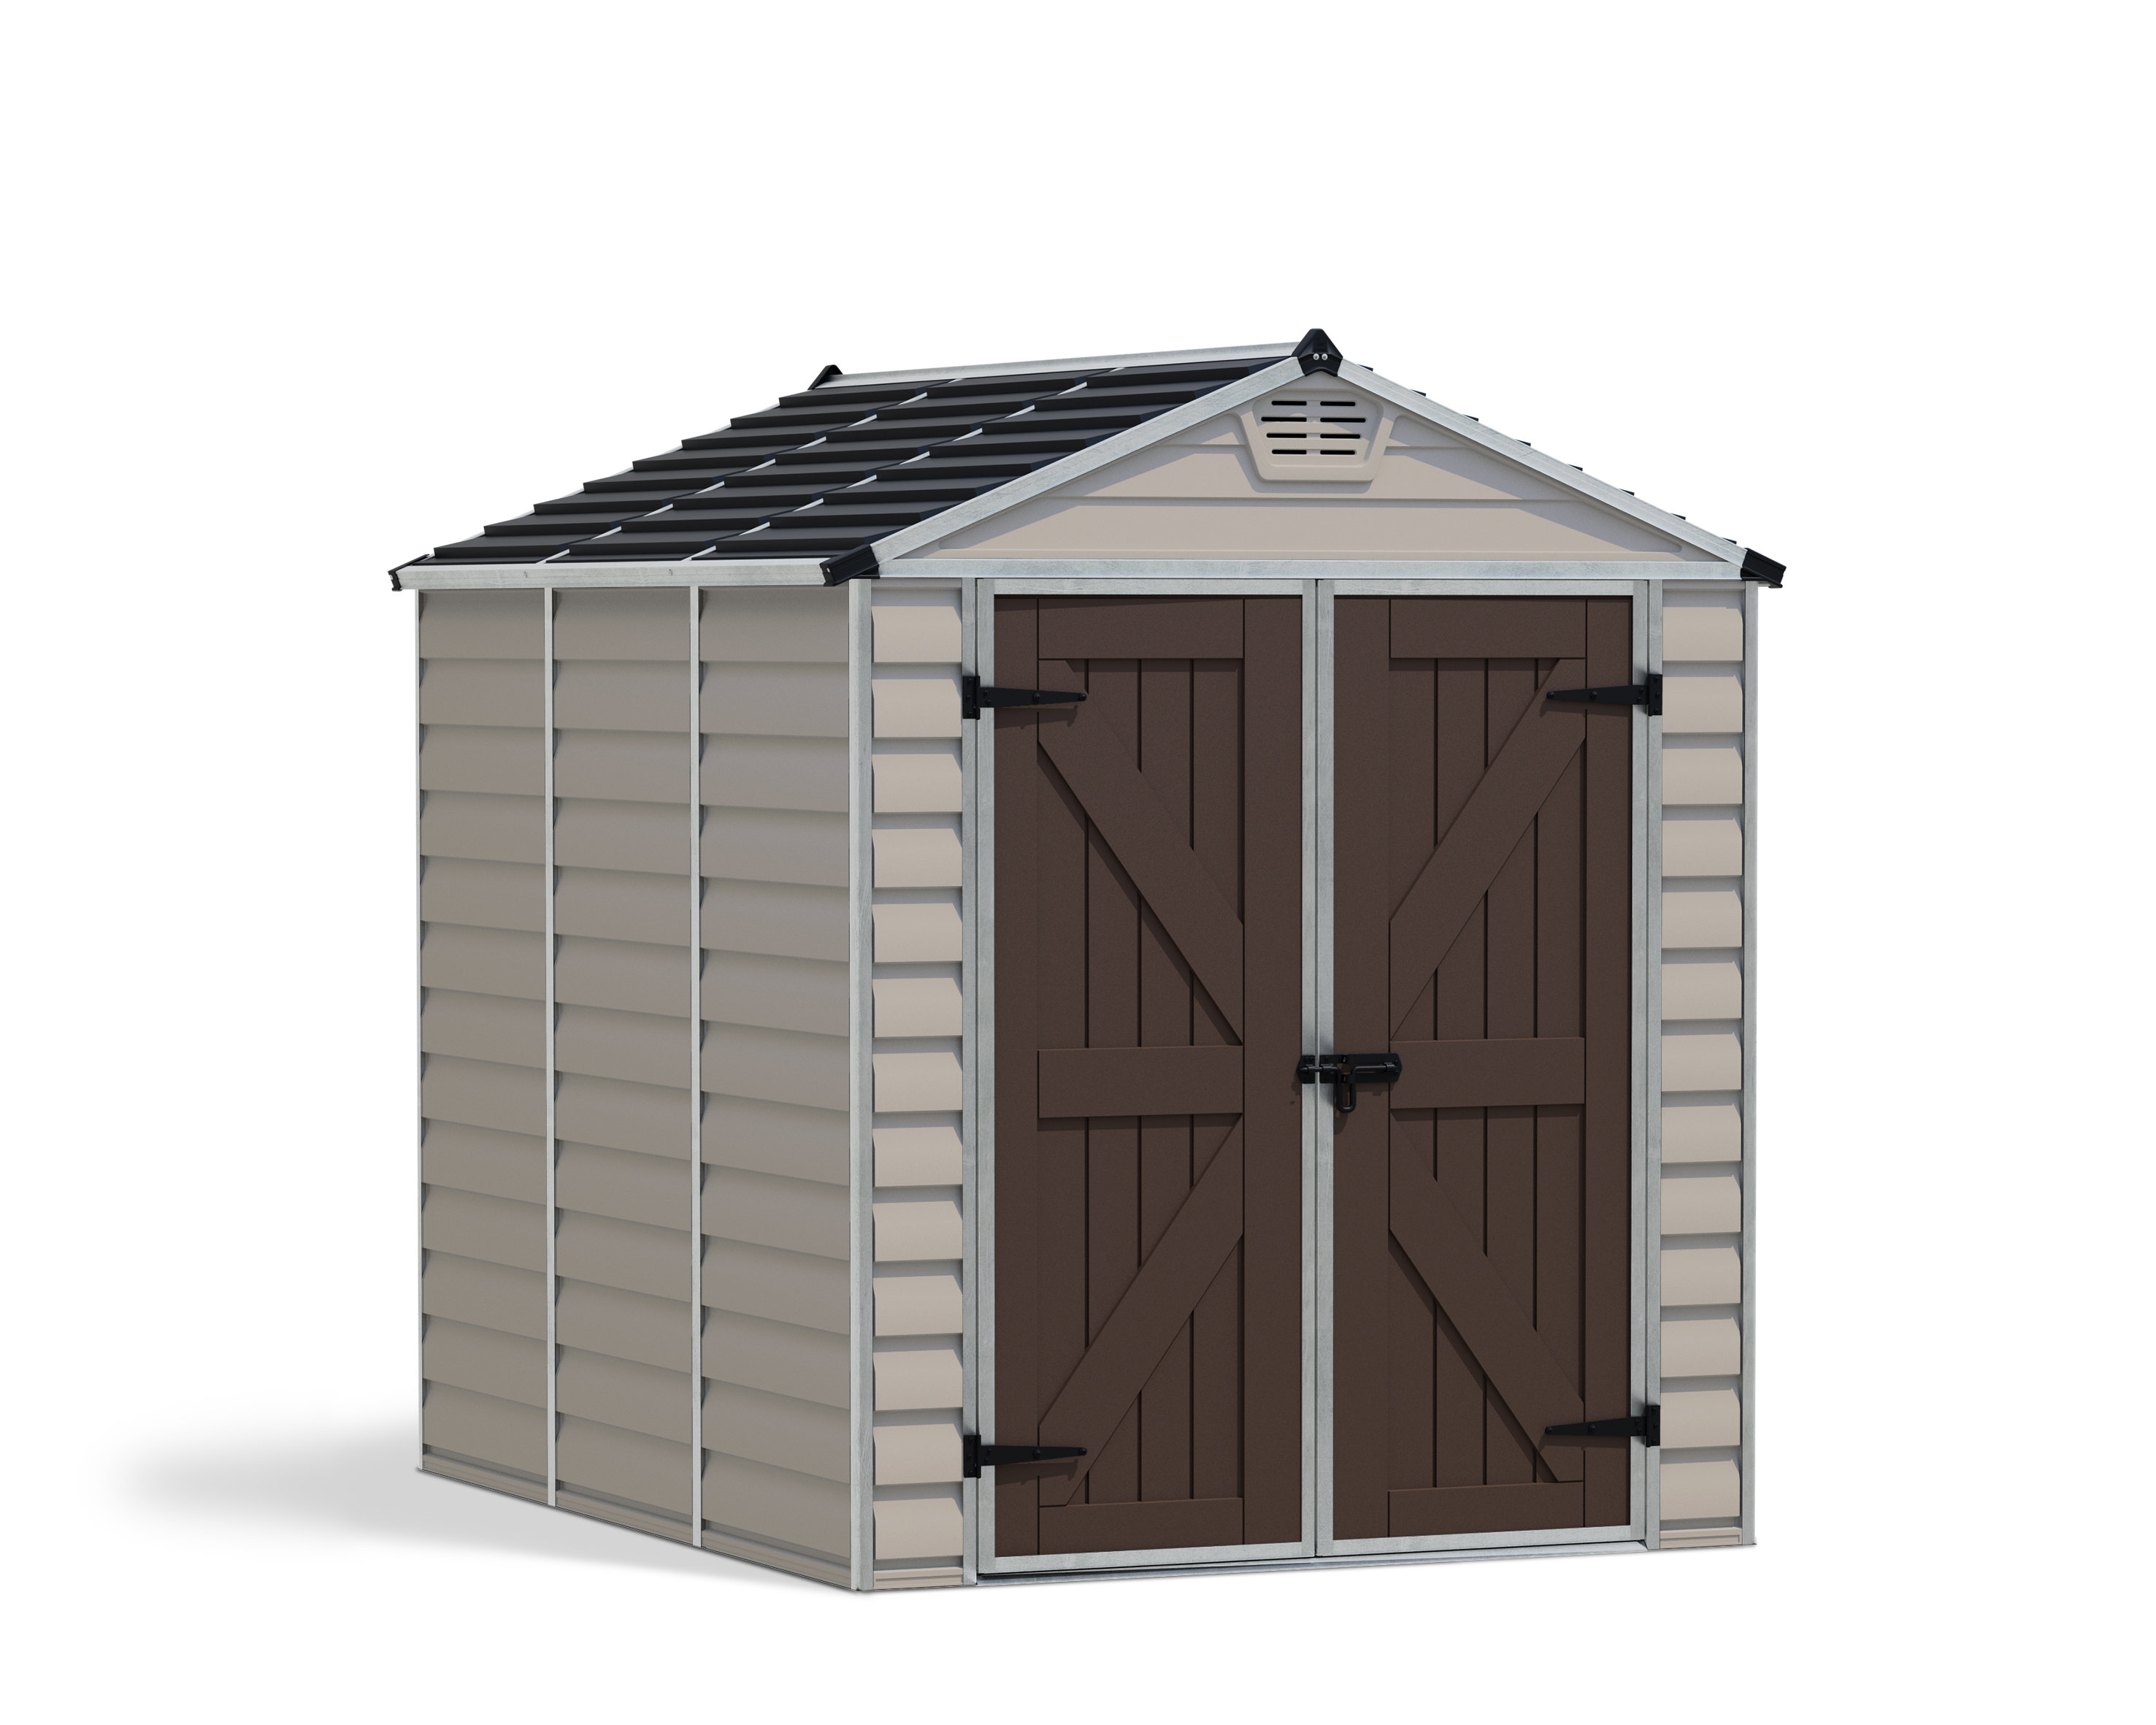 Rubbermaid 3 x 5 ft. Plastic, Resin and Polycarbonate Storage Shed, Beige  and Gray 